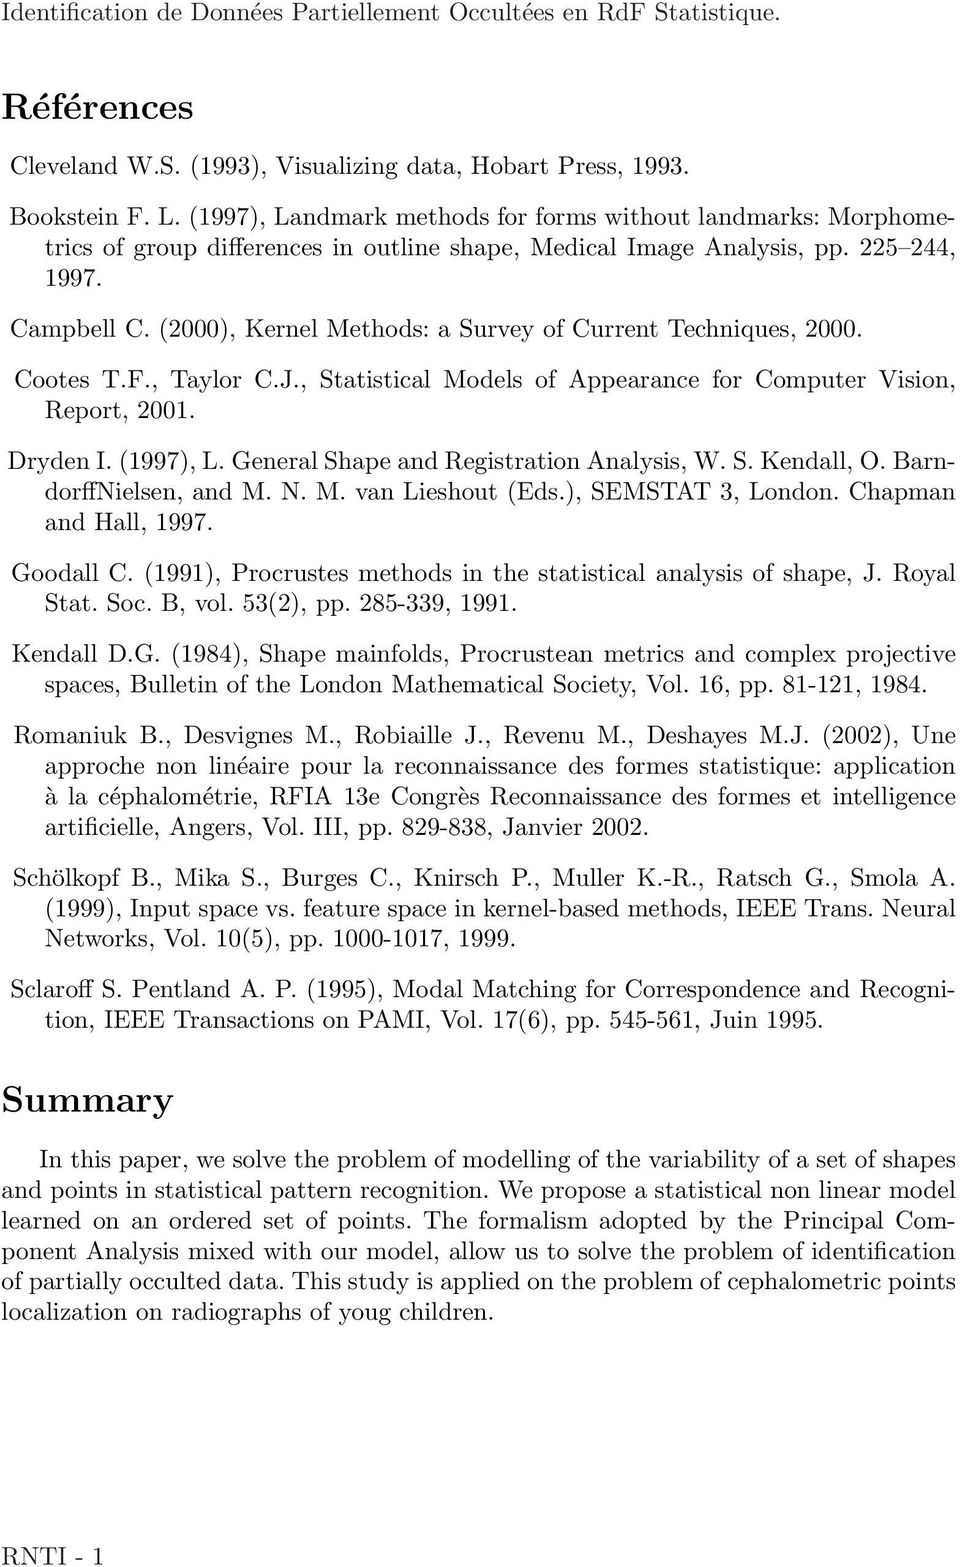 Statistical Models of Appearance for Computer Vision, Report, 2001 Dryden I (1997), L General Shape and Registration Analysis, W S Kendall, O BarndorffNielsen, and M N M van Lieshout (Eds), SEMSTAT